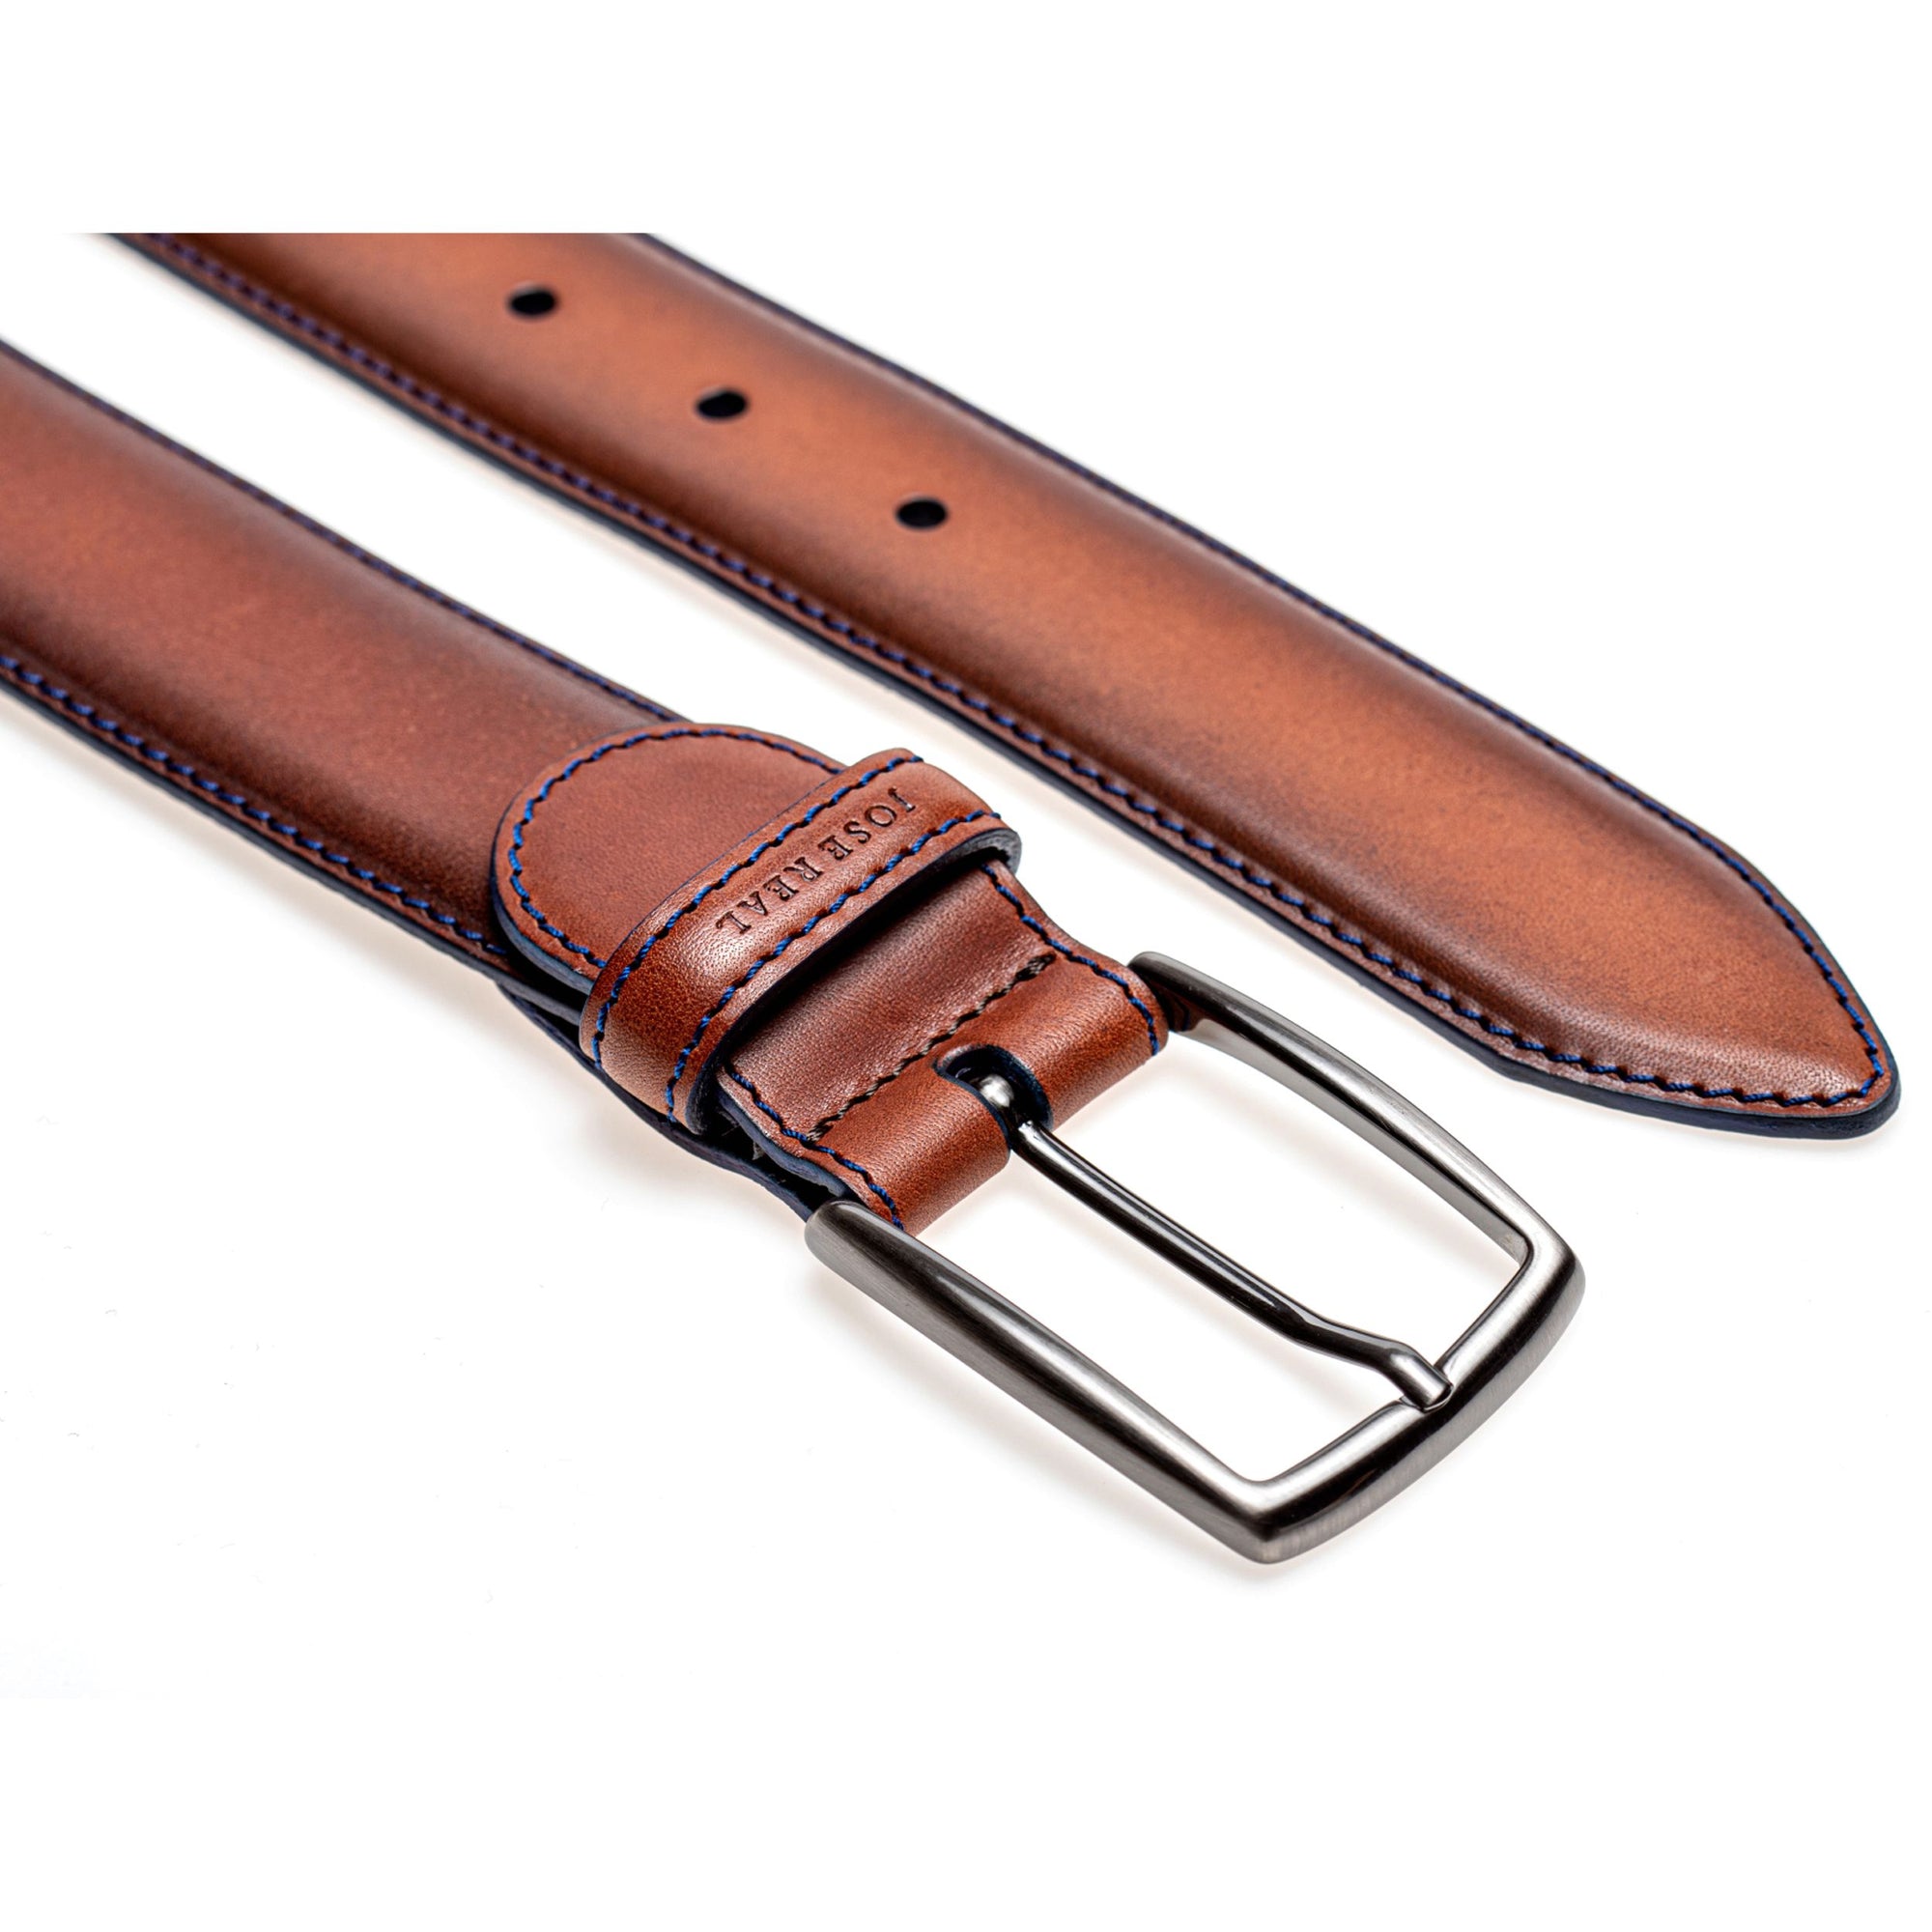 Hand Painted Calfskin Belt in Brown with Blue Contrast Stitching by Jose Real